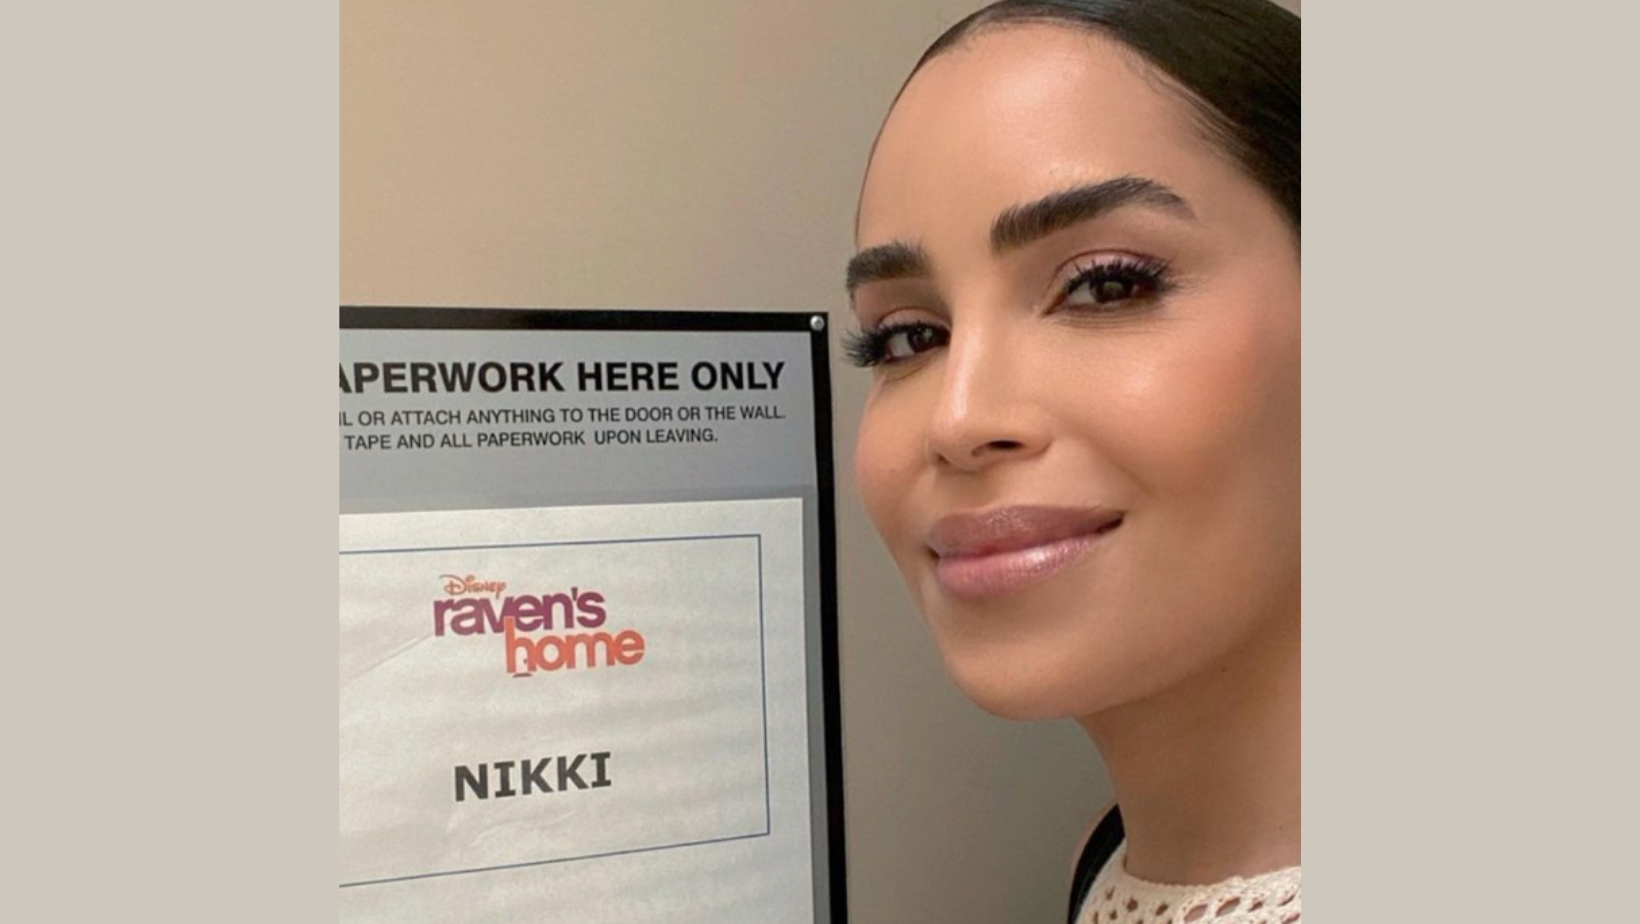 The Source |Disney Channel Introduces Its First Trans Character On Show “Raven's Home”